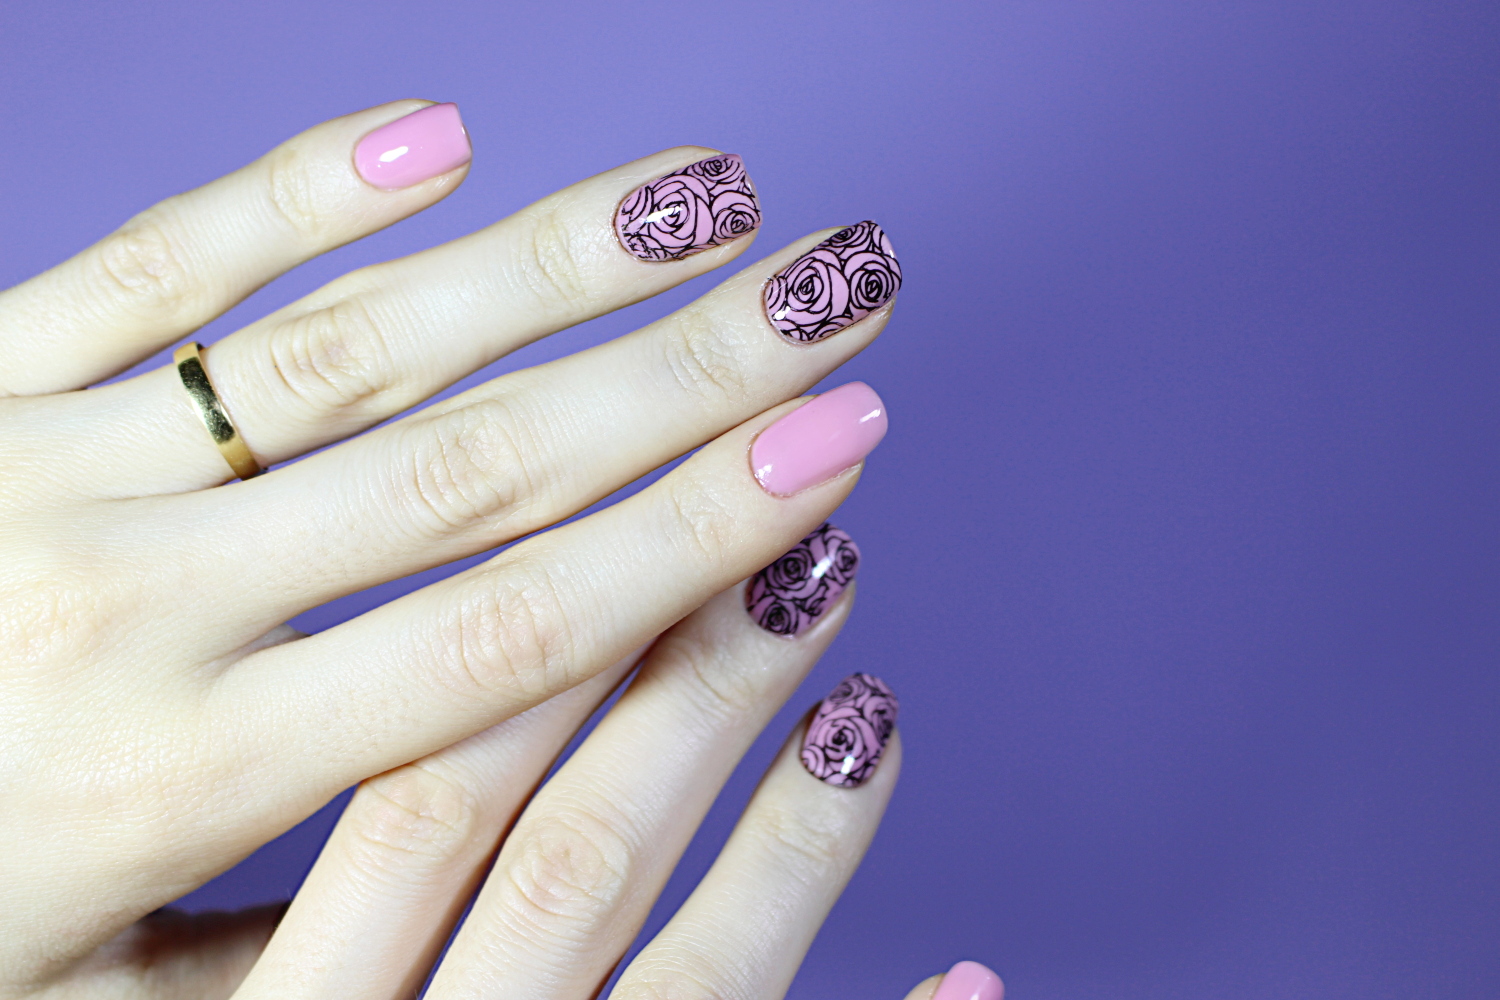 a close-up of a pink and black rose pattern nail look done with a help of nail stamping